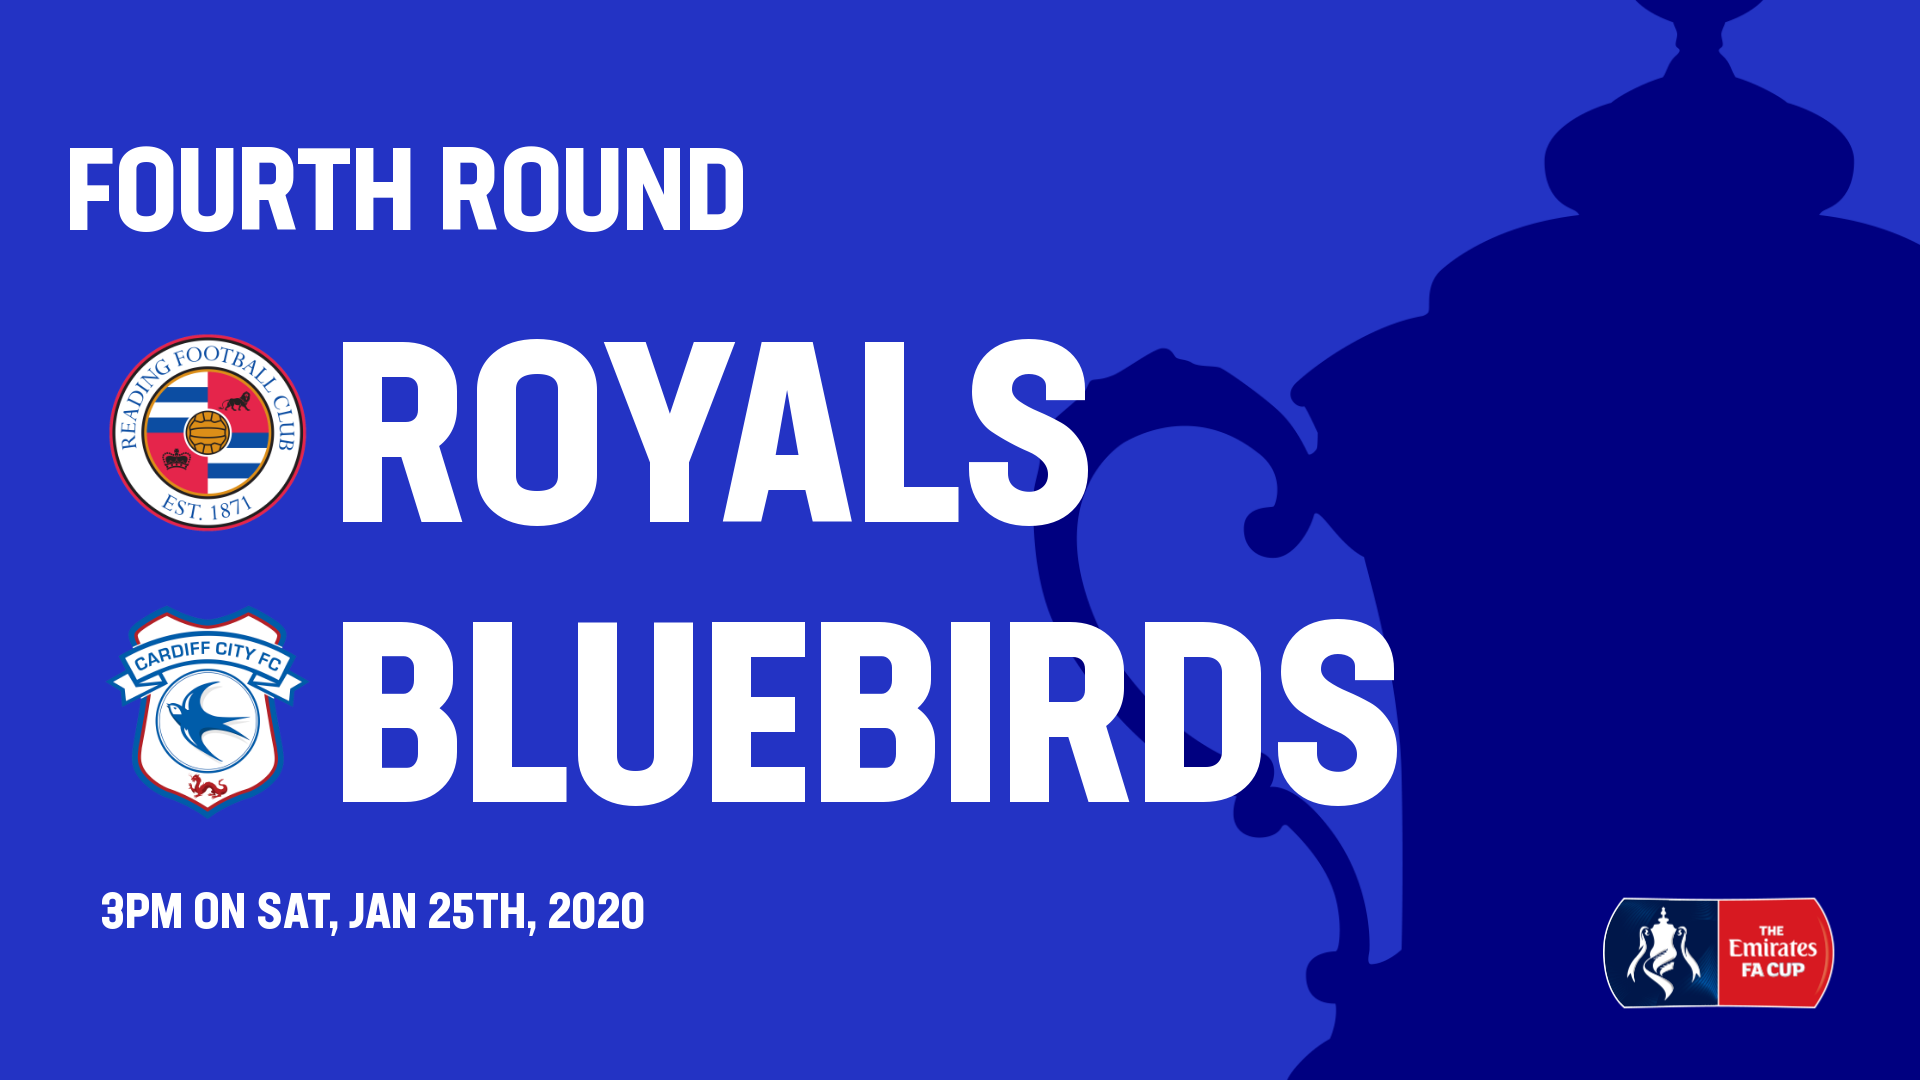 The Bluebirds are heading to Reading...